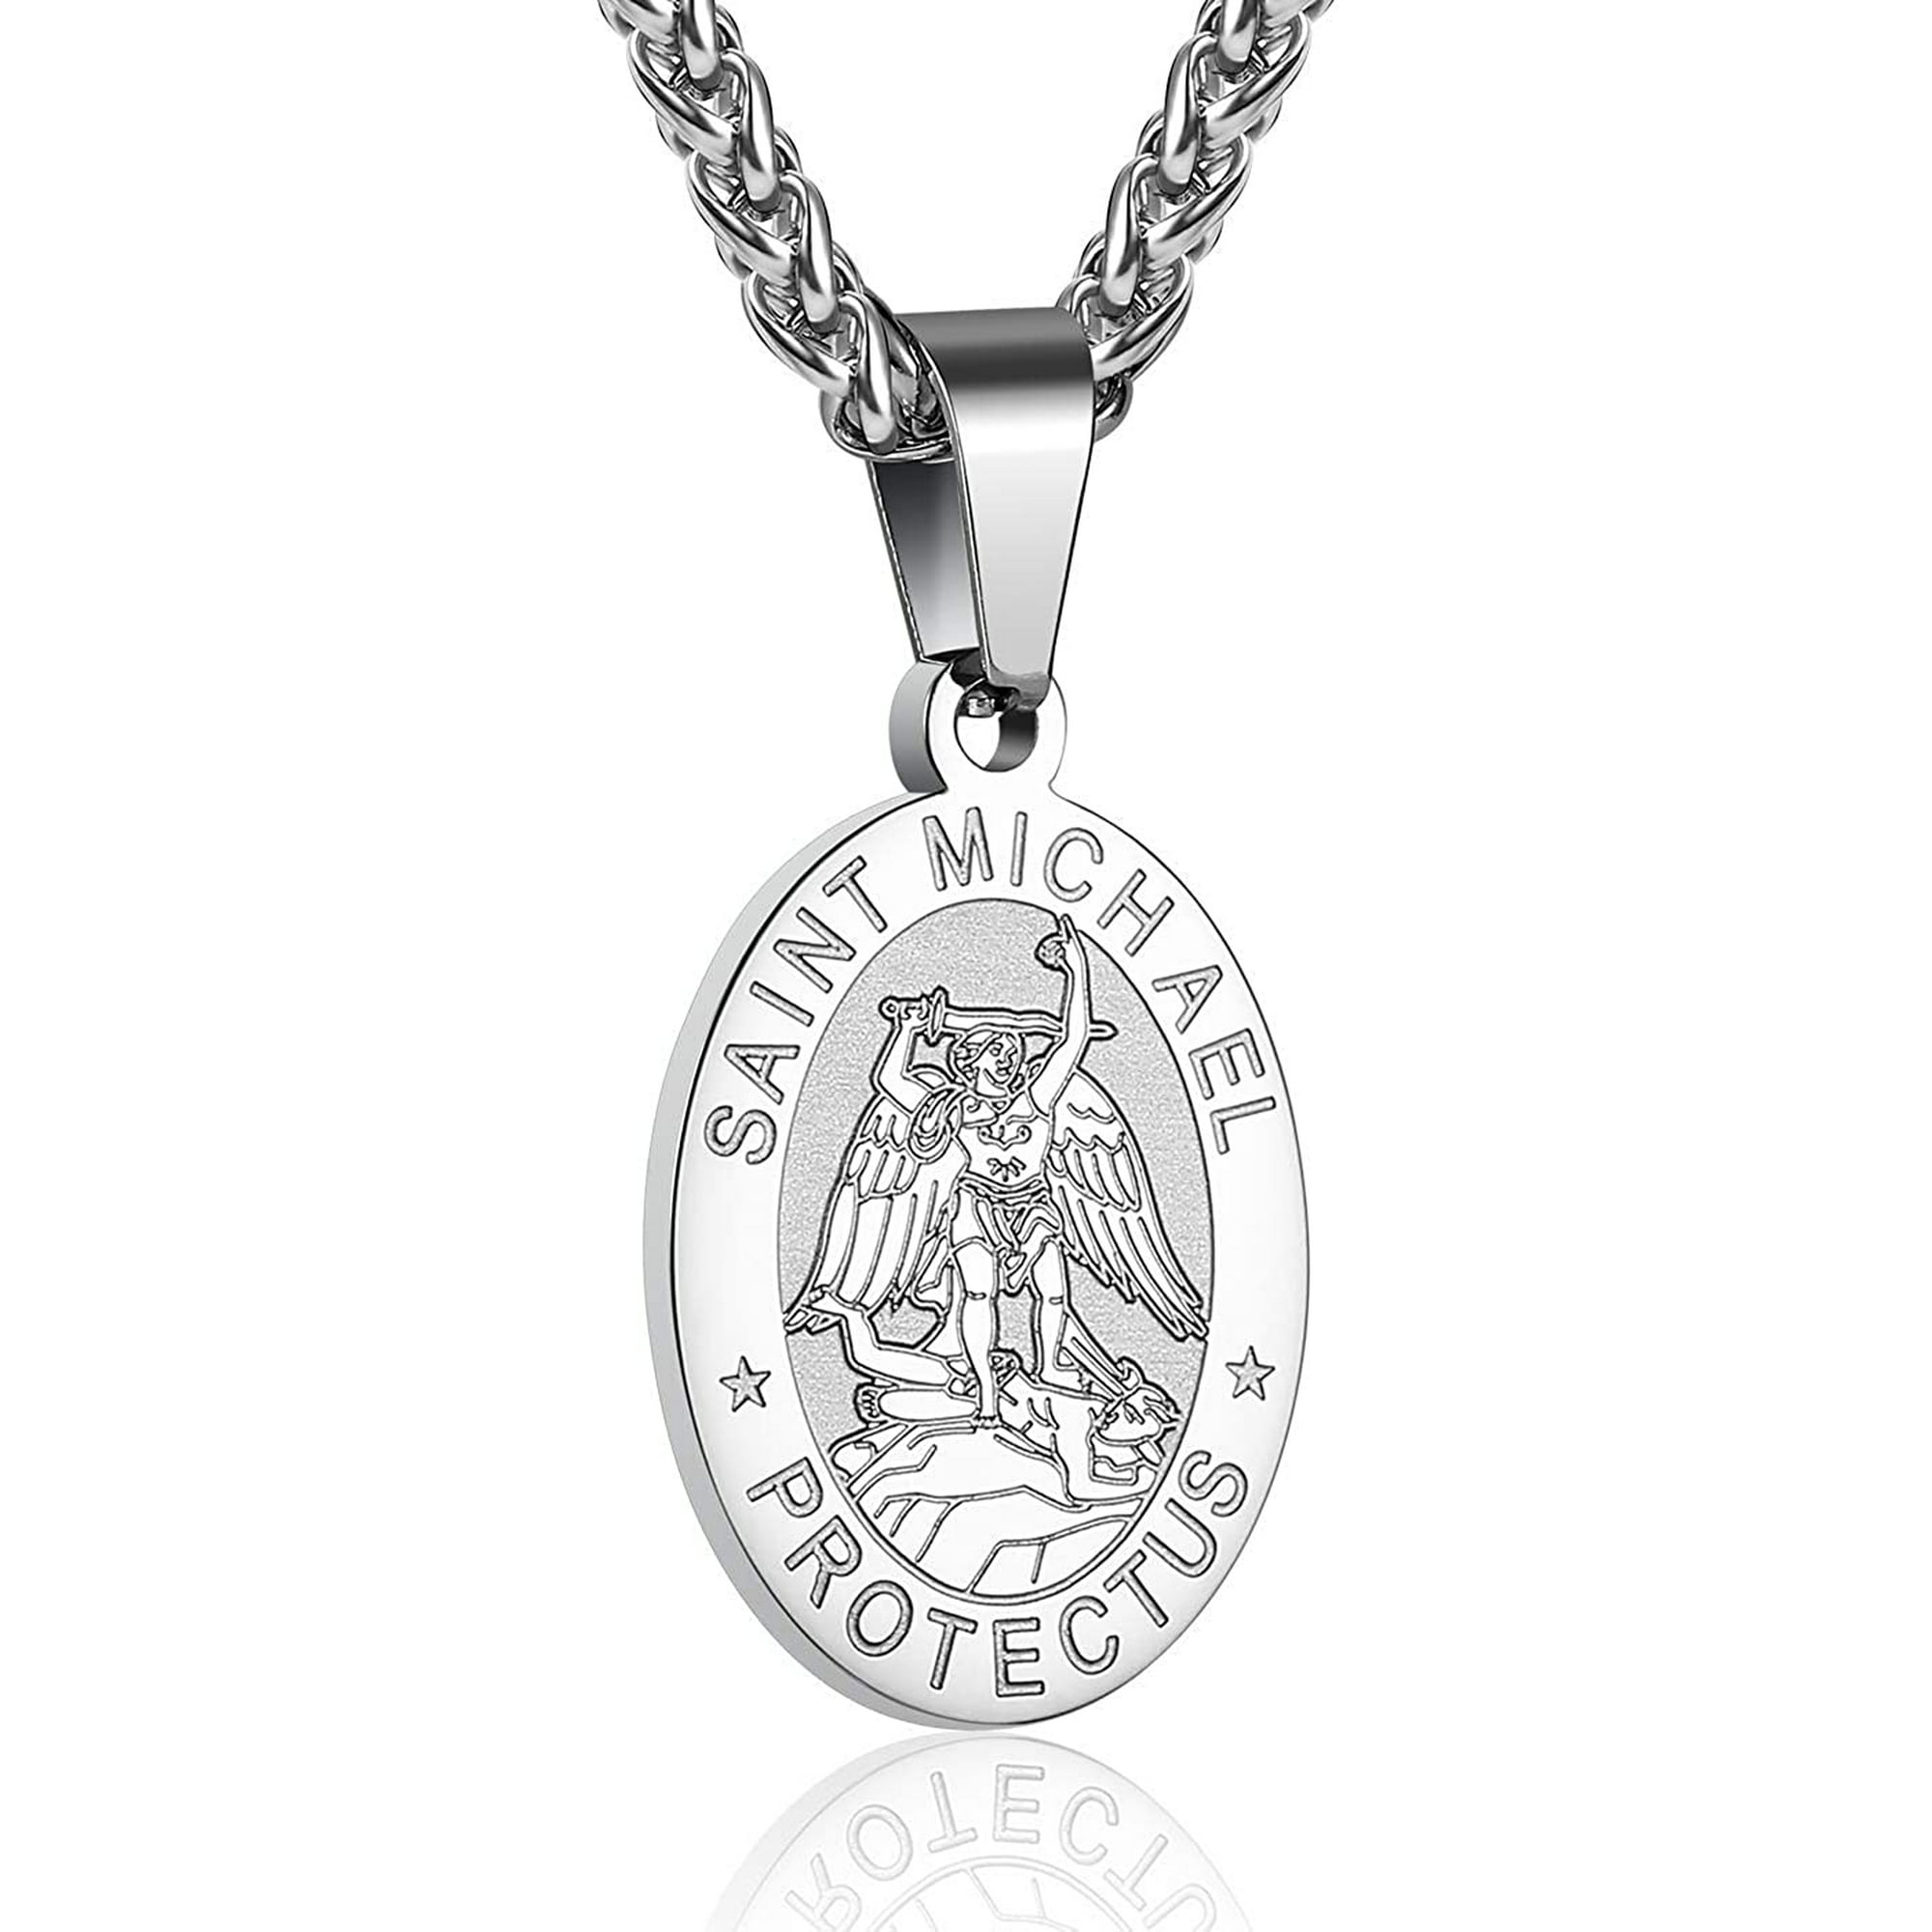 BLAKE Oval Saint Christopher/Michael/Joseph/Jude Necklace for Men Women P Stainless Steel Catholic Patron Pendant with Chain 24 Inches 